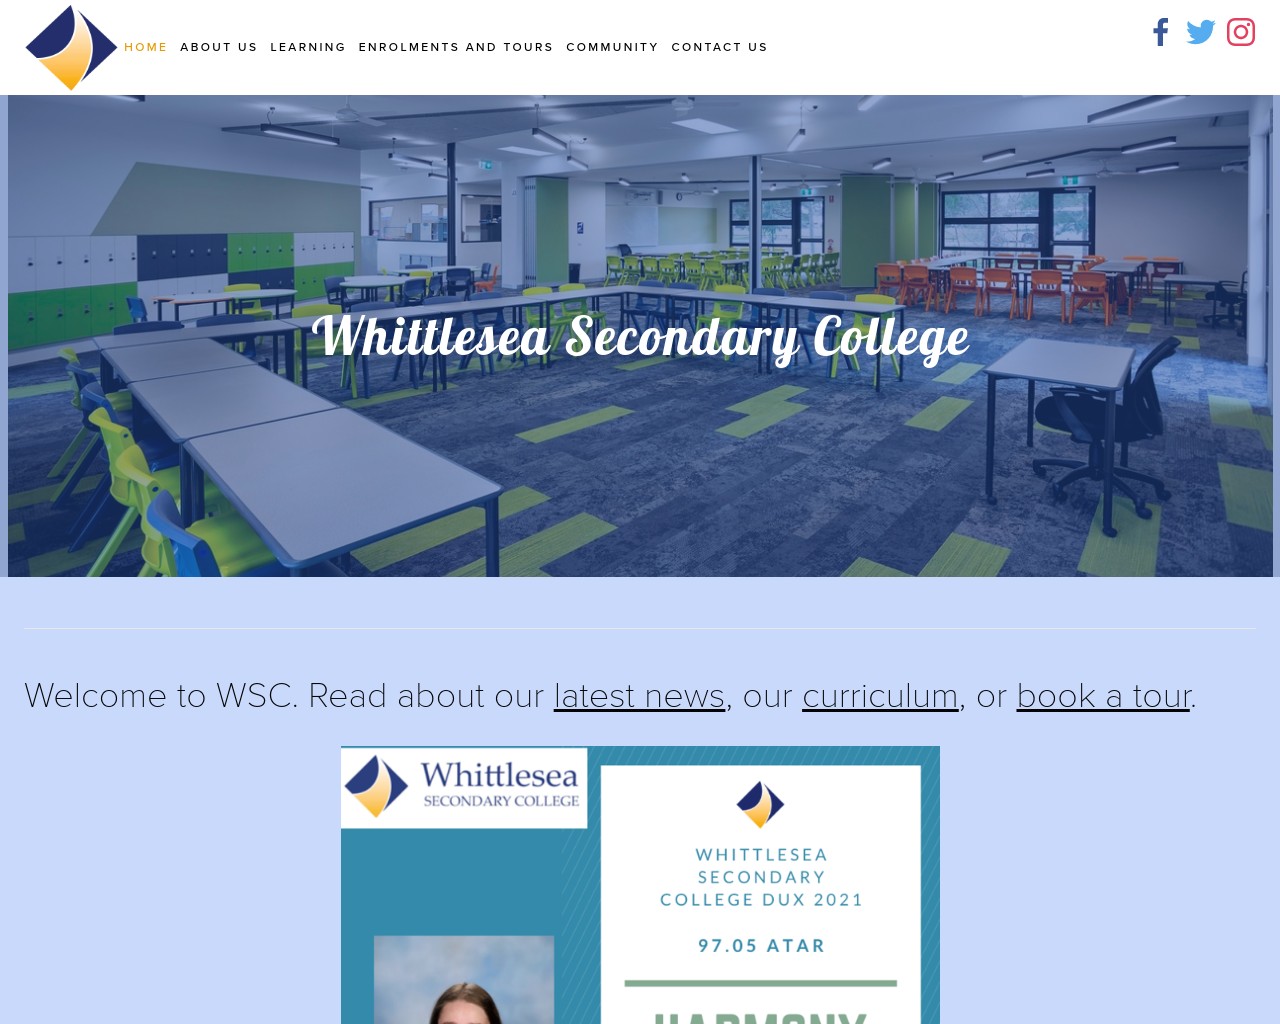 Whittlesea Secondary College